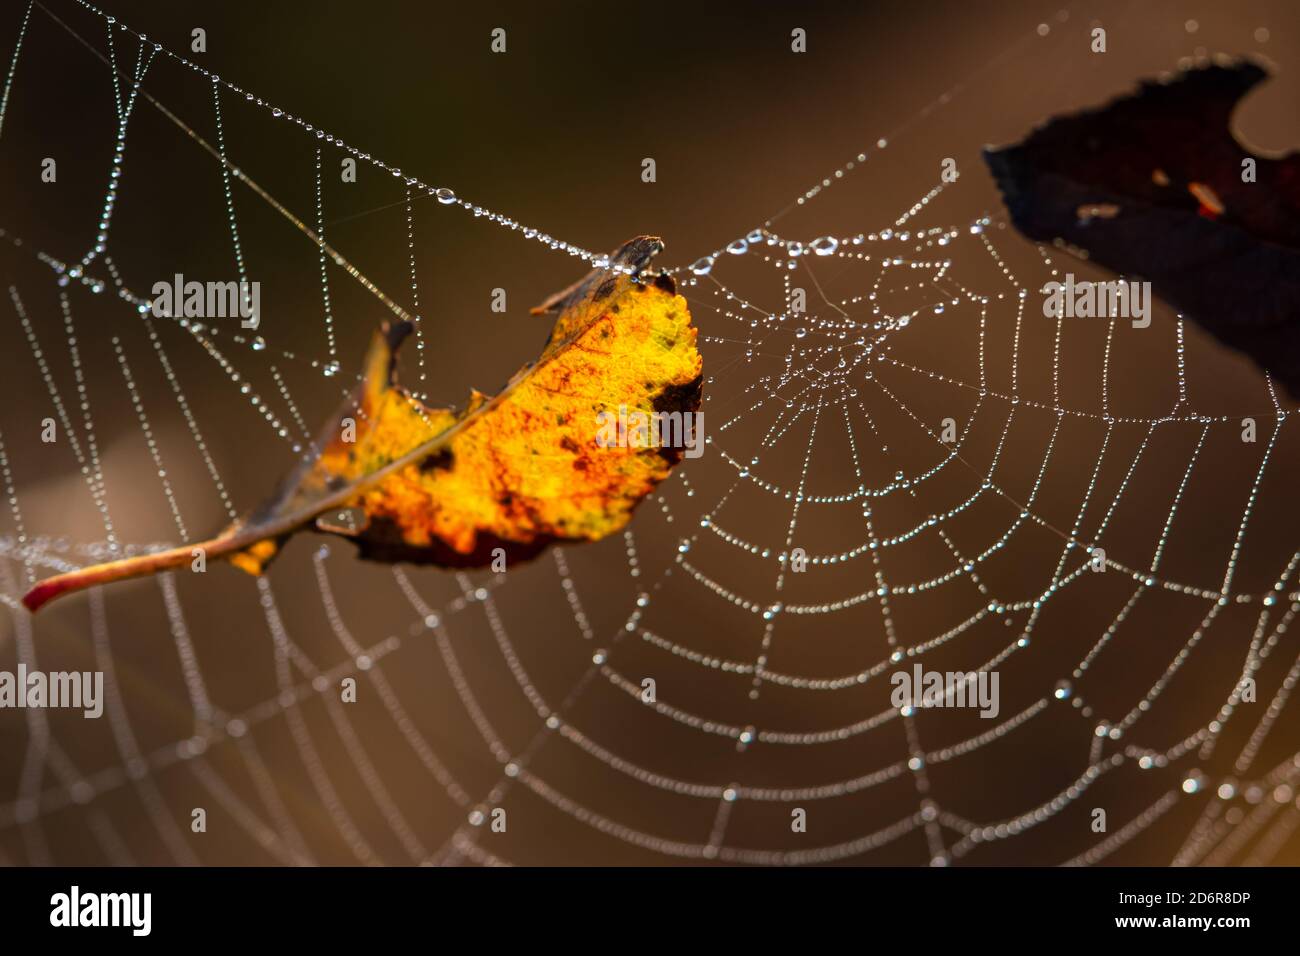 Spider web in dew drops close-up on a blurry background. A yellow leaf fell on a spider's web. Concept of approaching autumn. The natural background. Stock Photo